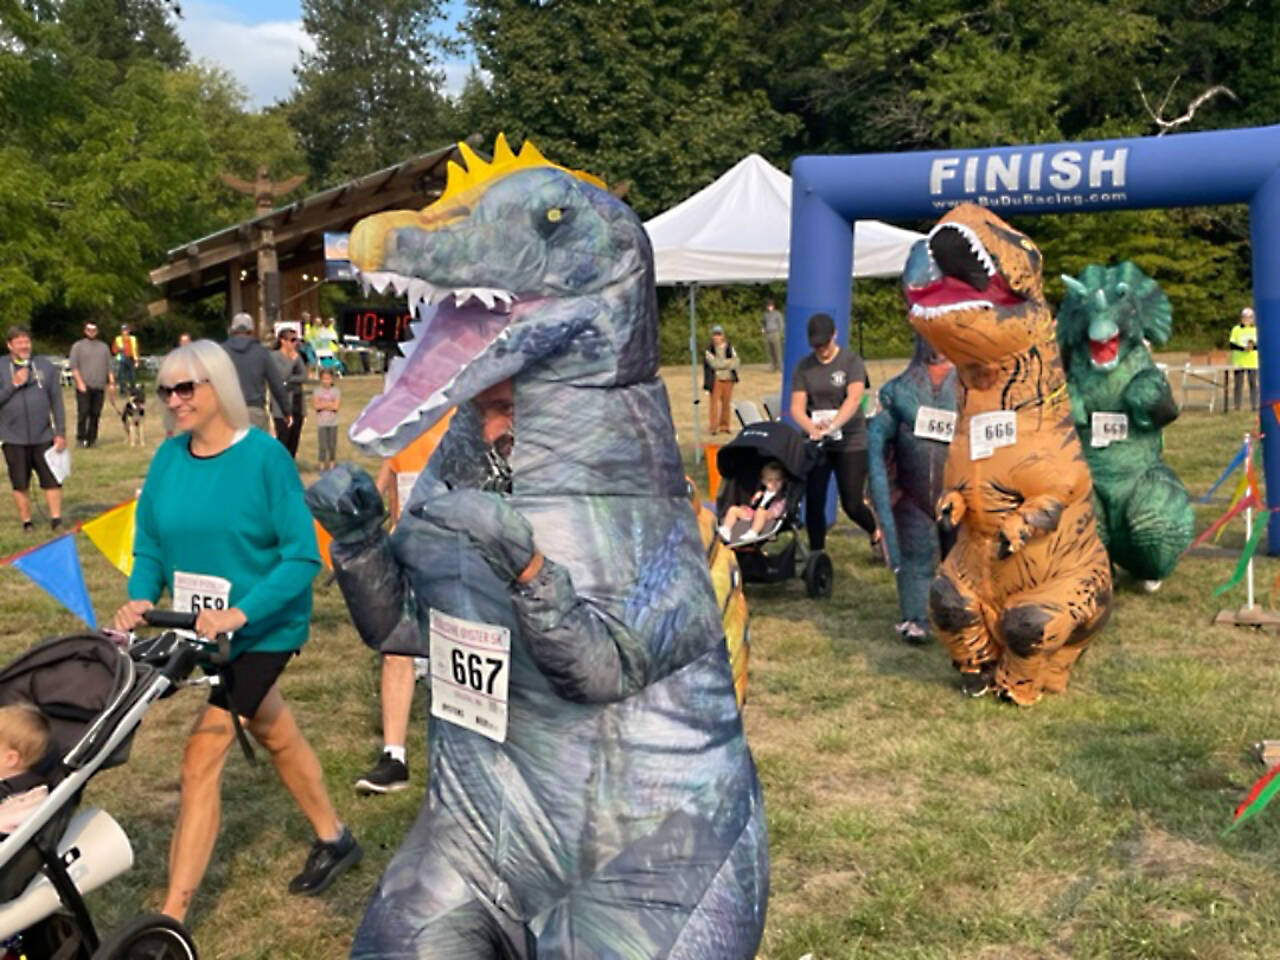 Geremy Jenkin of Bremerton leads his dinosaur pack of N. Jenkin, 11 (666) and Robin Jenkin, 16 (668) in the Quilcene Oyster Run 5K in Quilcene on Sunday. (David Goetz)